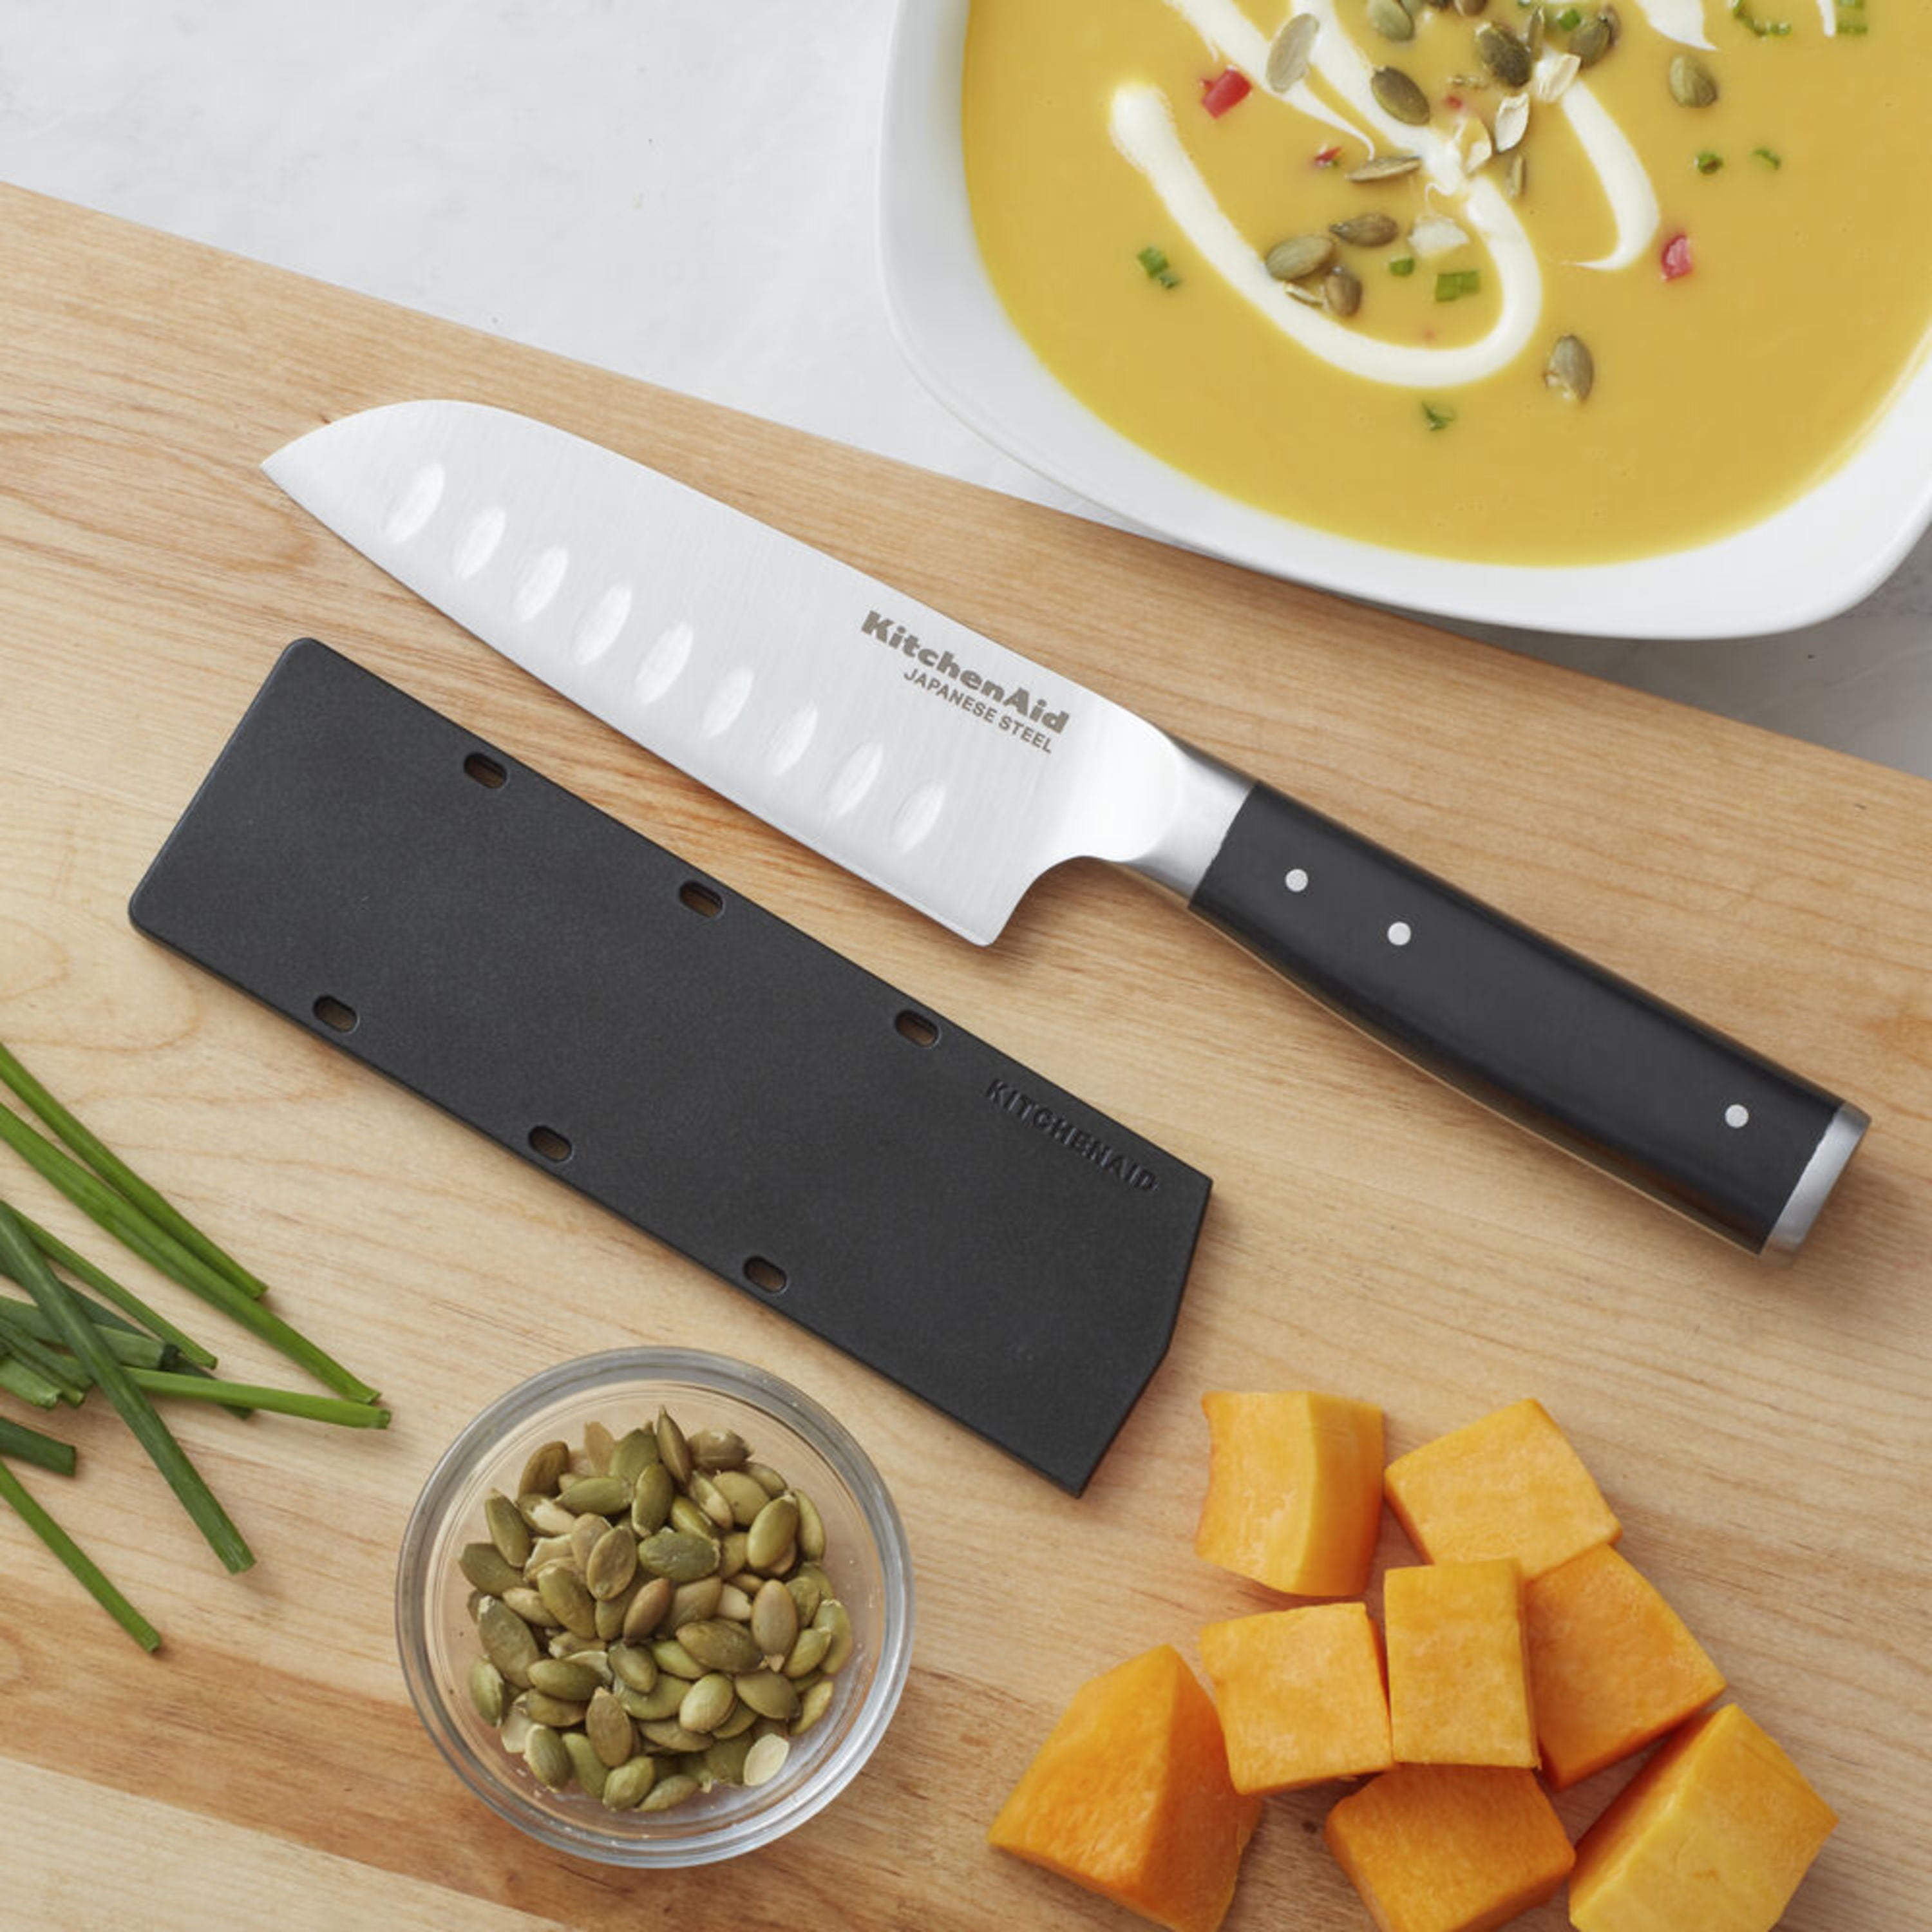 Mind Blowing Review of the KitchenAid Gourmet Knife Set: You Won't